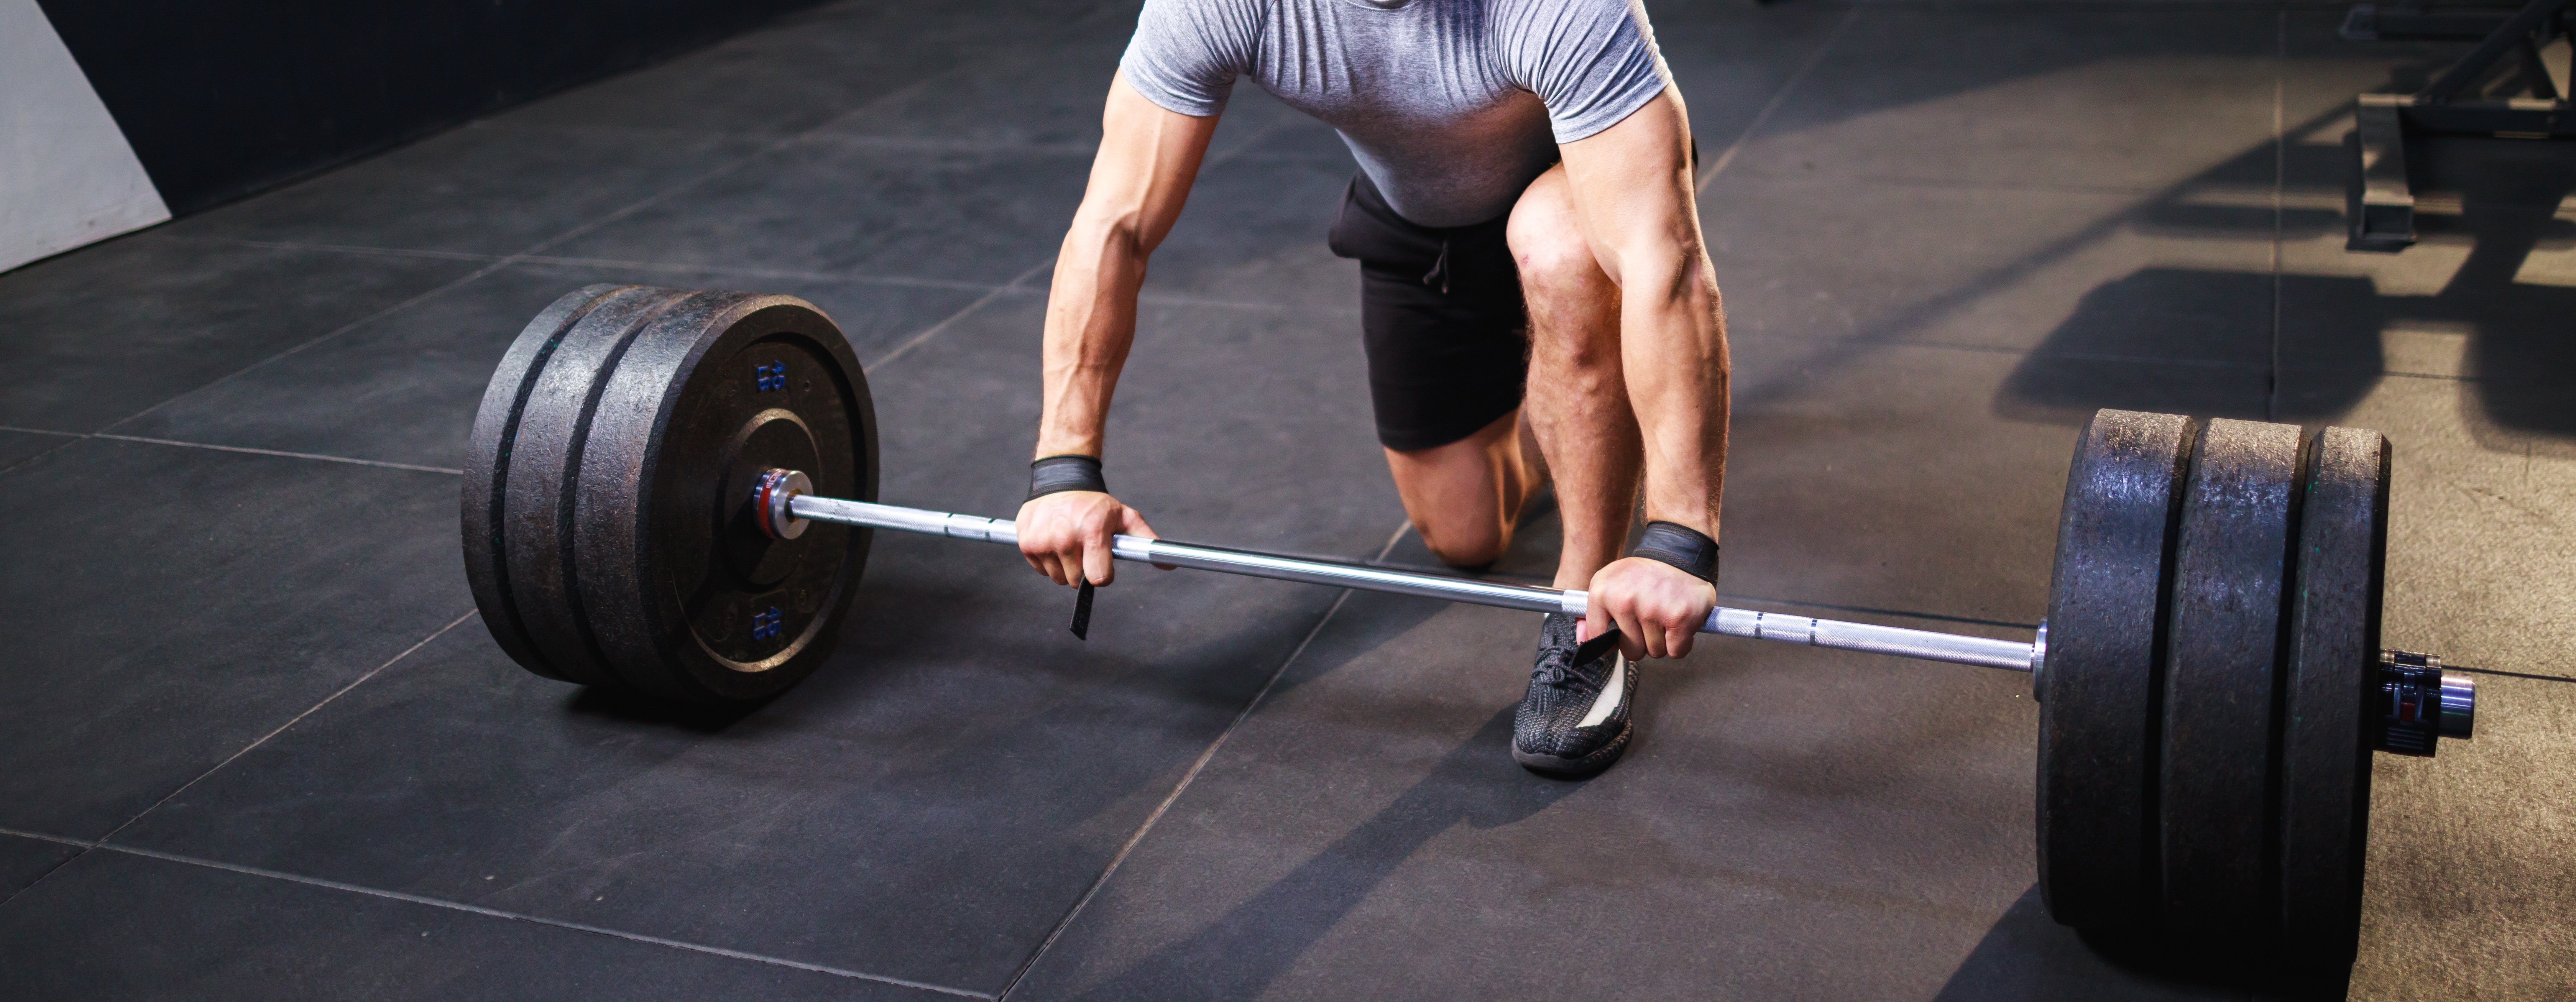 close-up-of-hand-of-man-doing-deadlift-exercise-in-2022-10-26-02-26-53-utc